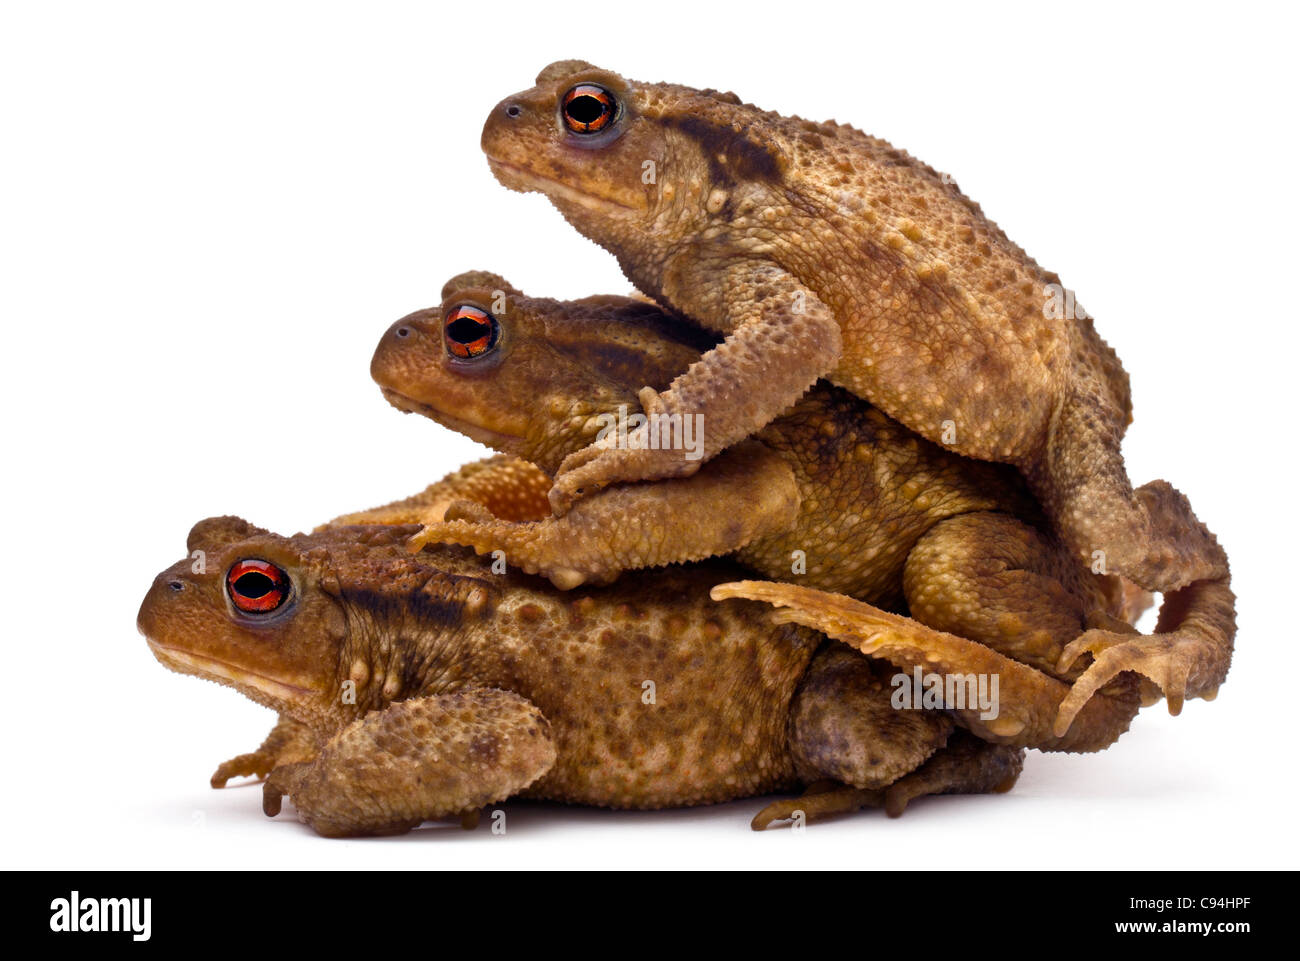 Three common toads or European toads, Bufo bufo, stacked in front of white background Stock Photo